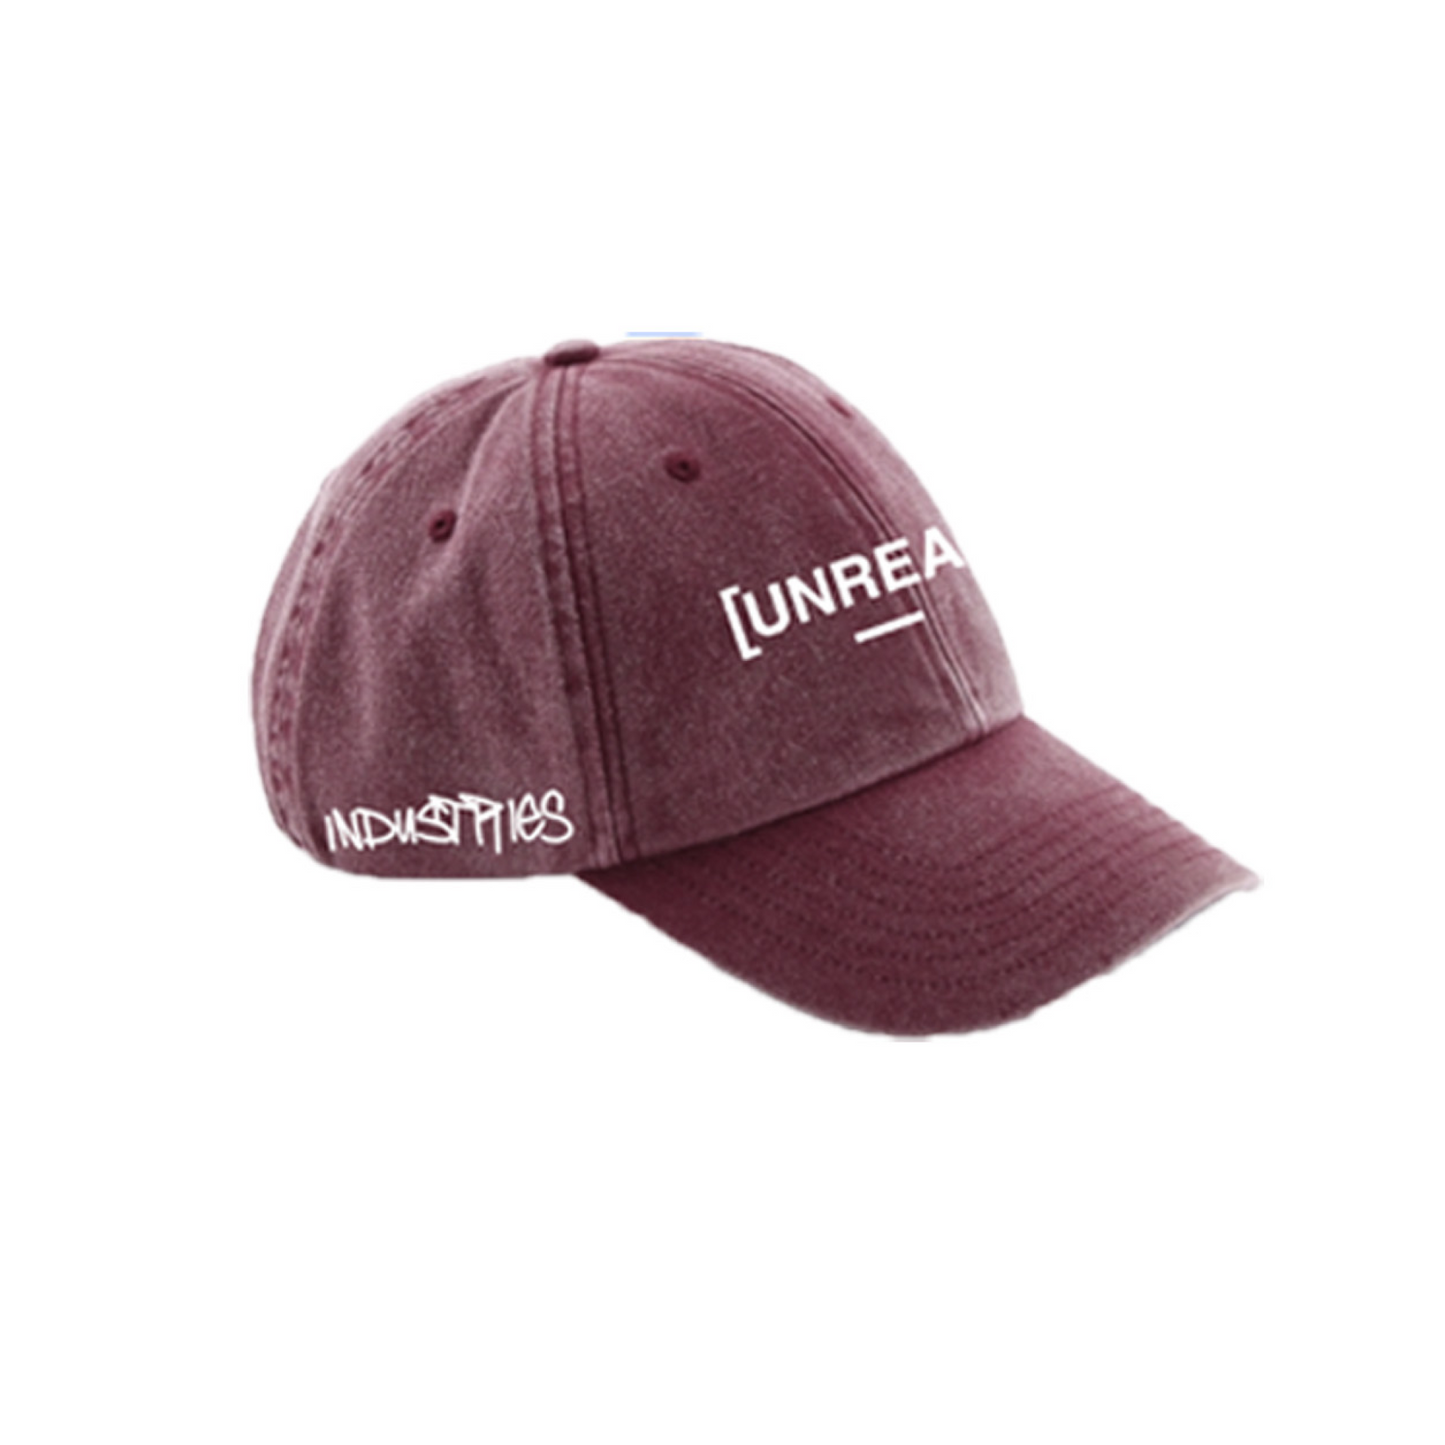 UNREAL Baseball Cap Washed Red